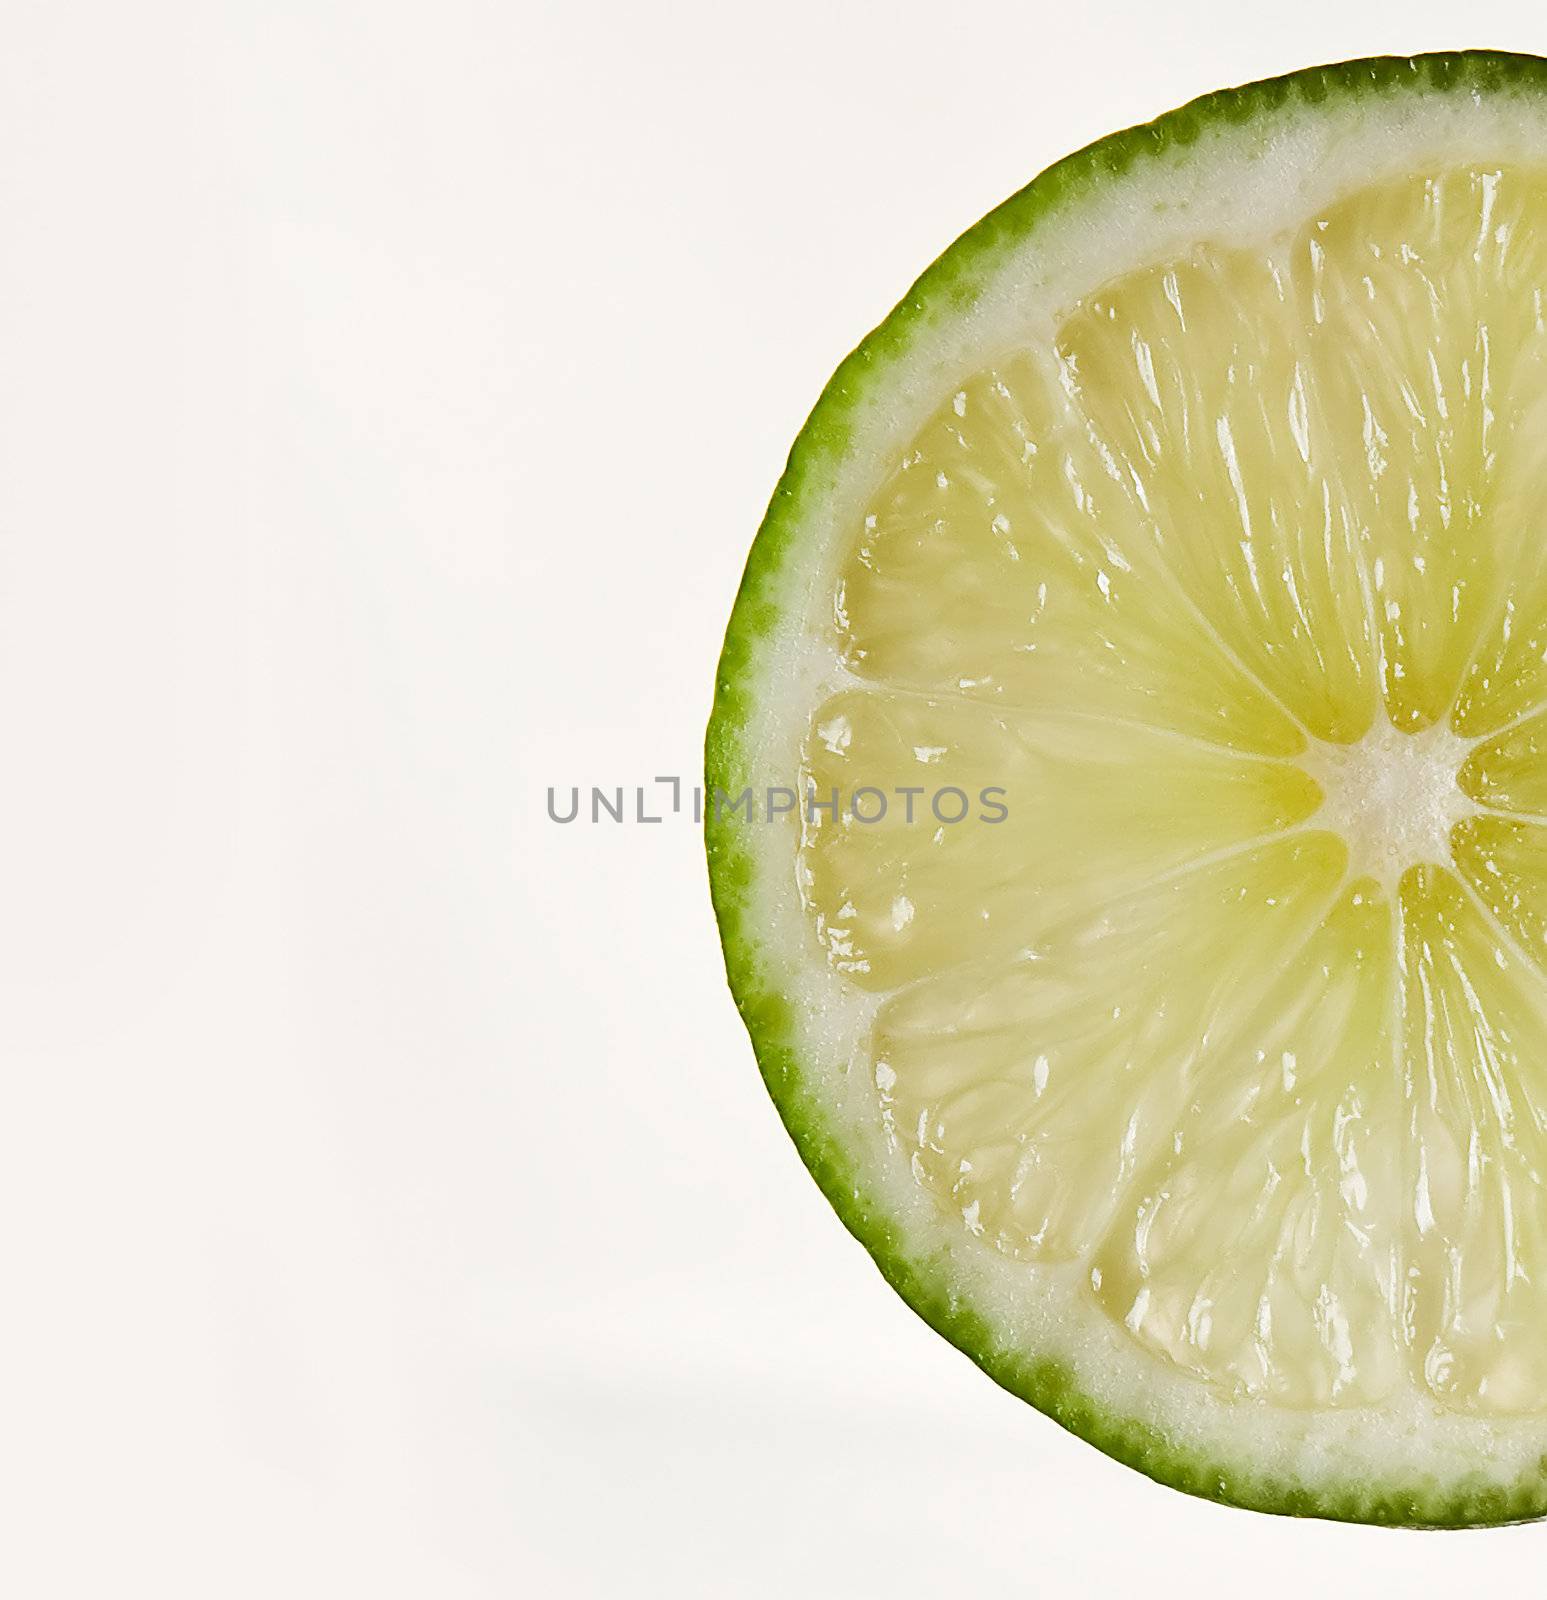 A wedge of lime, isolated on white